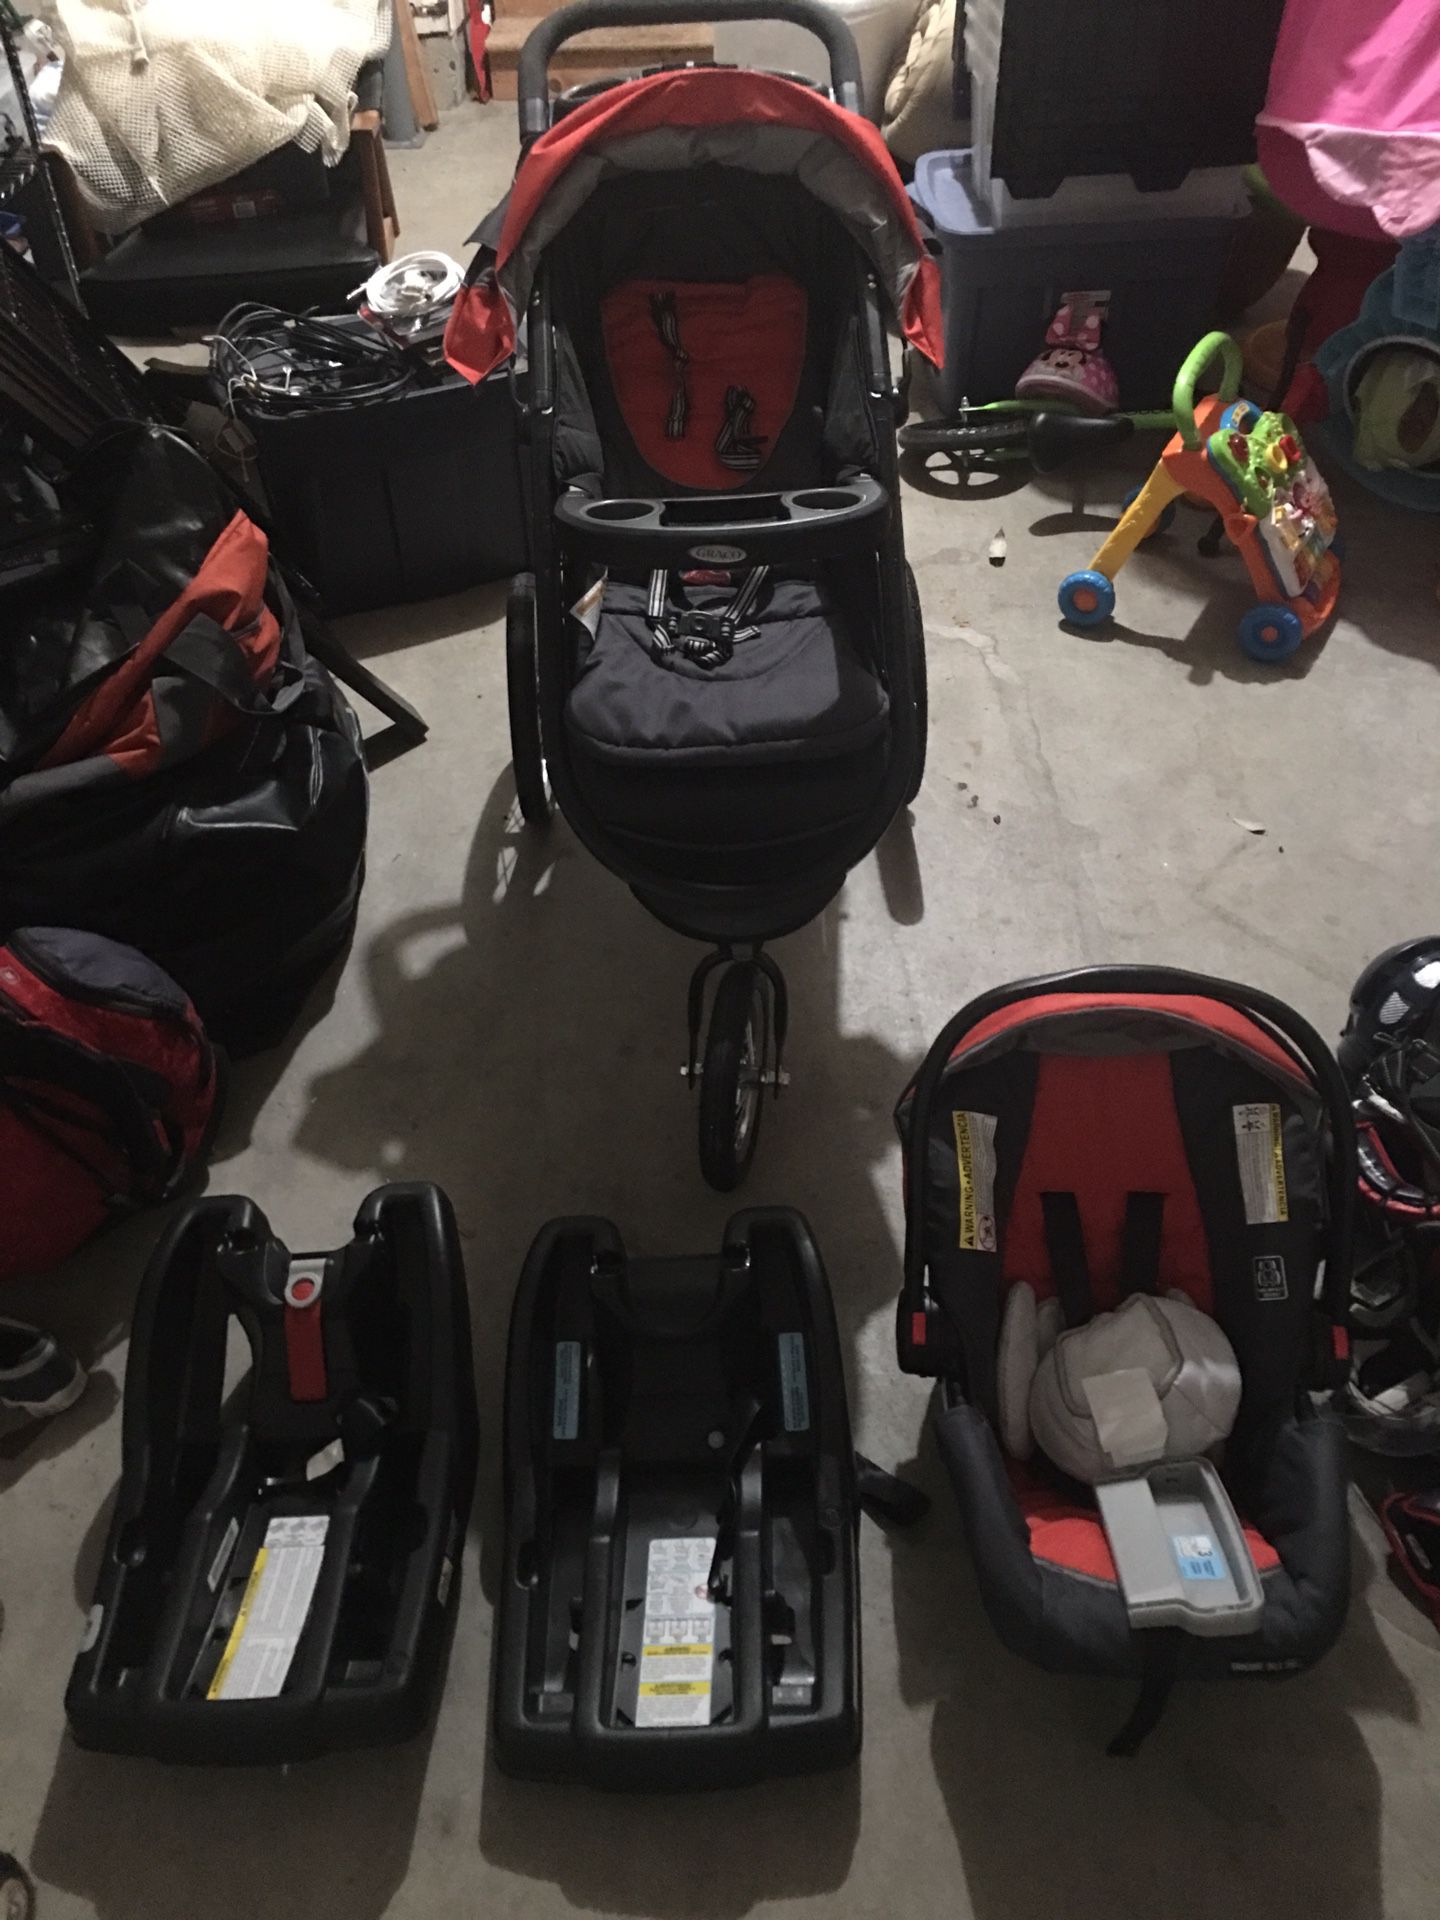 Graco stroller, car seat, 2 car bases. 3 years old, great shape